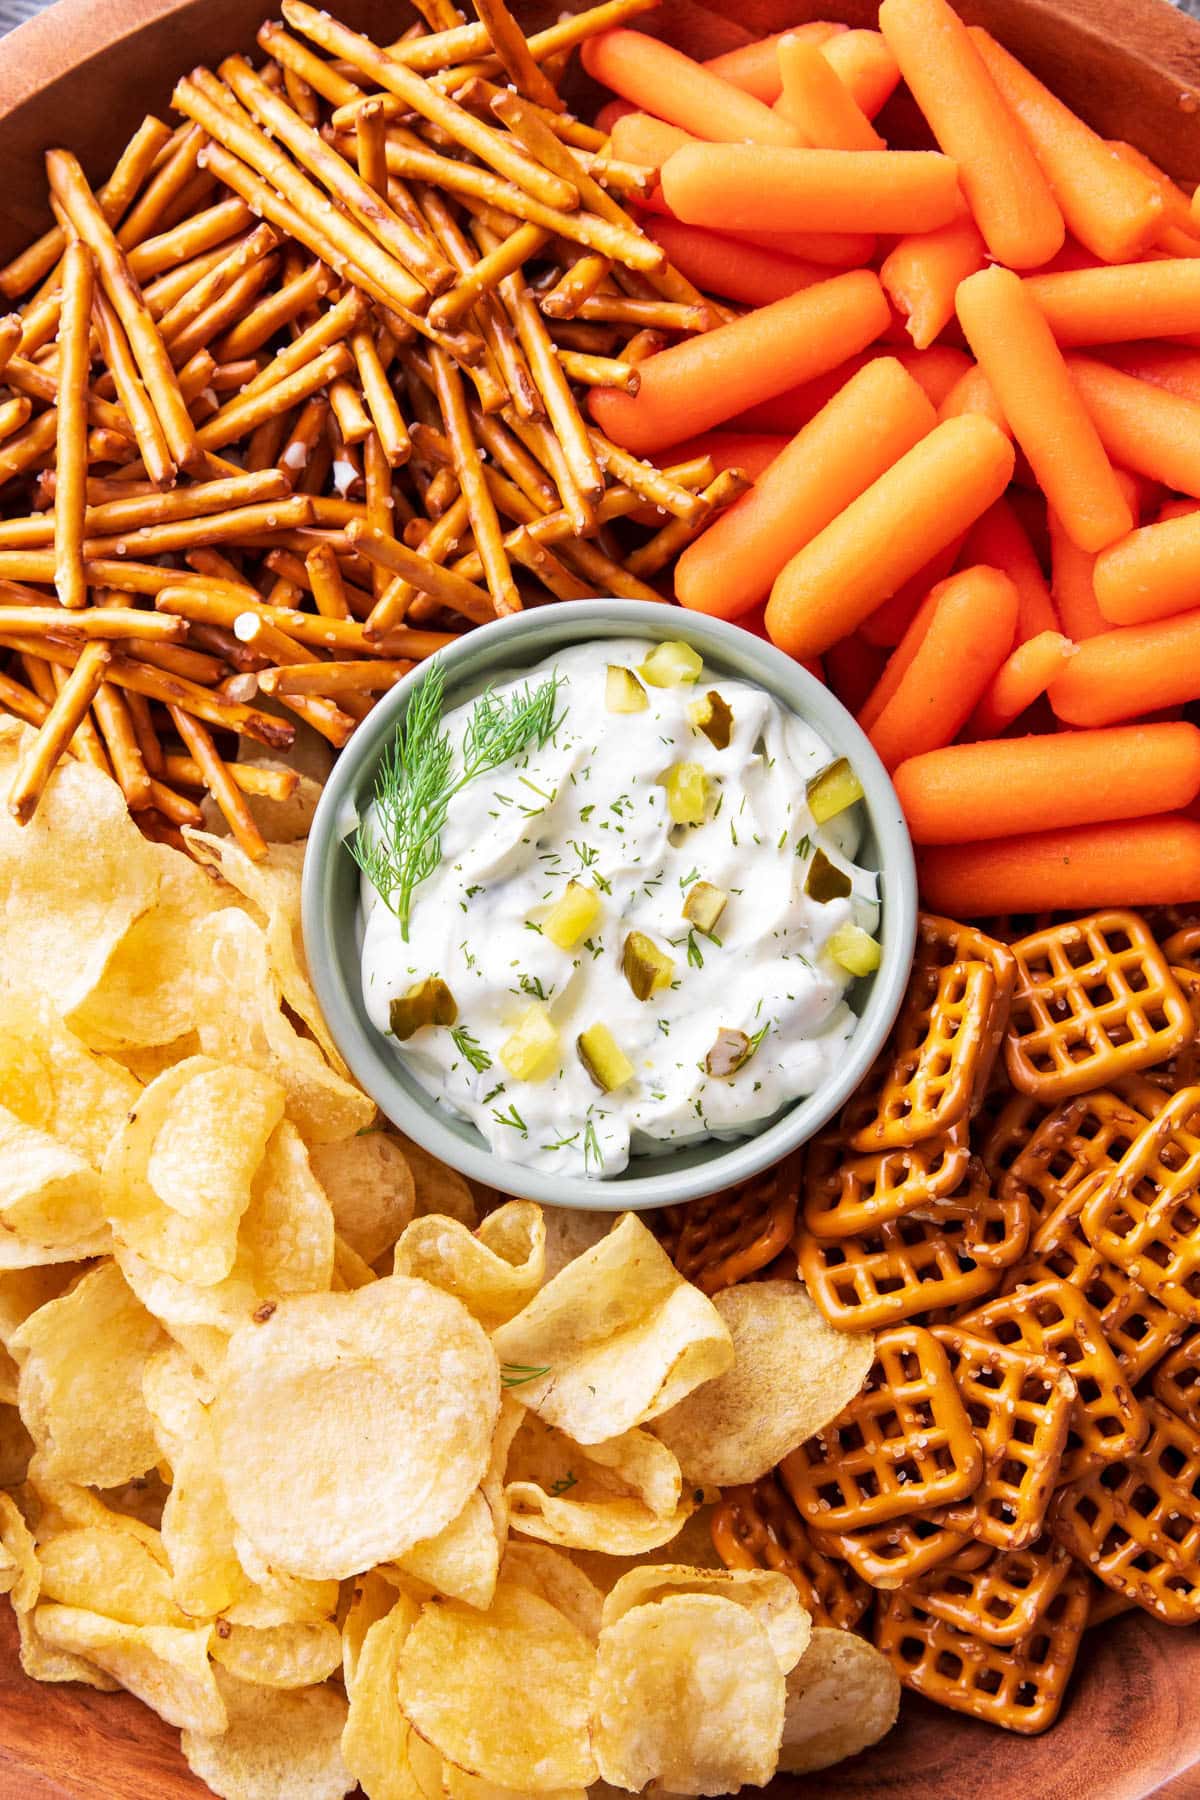 A serving platter with dill pickle dip in the center served with carrots, pretzels, and potato chips for dipping